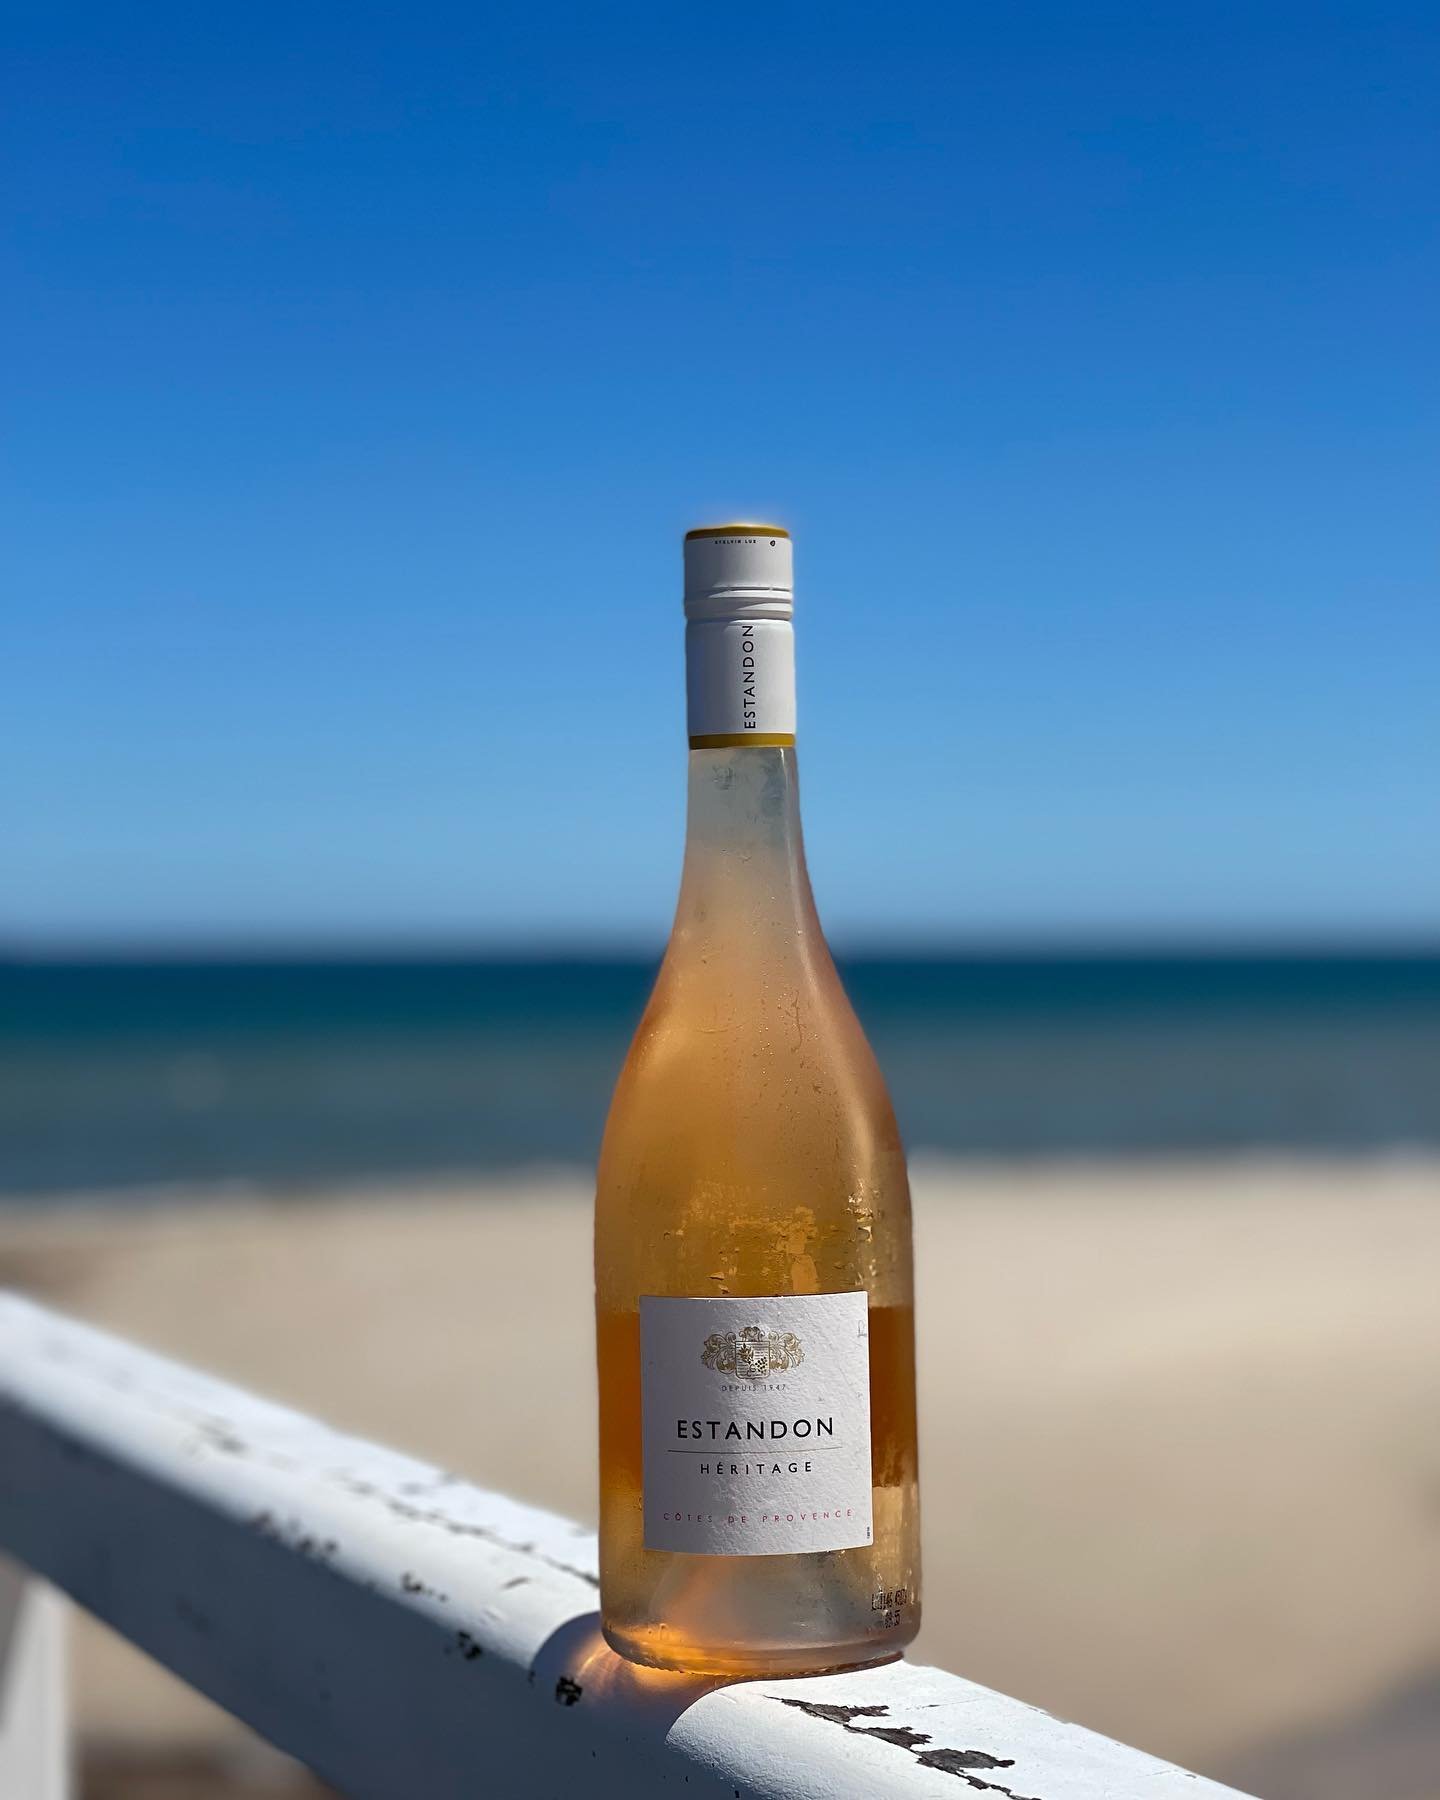 When Provence, France meets Grange Beach!
Estandon French Ros&eacute; is a stand out drink choice for those summer days by the beach!